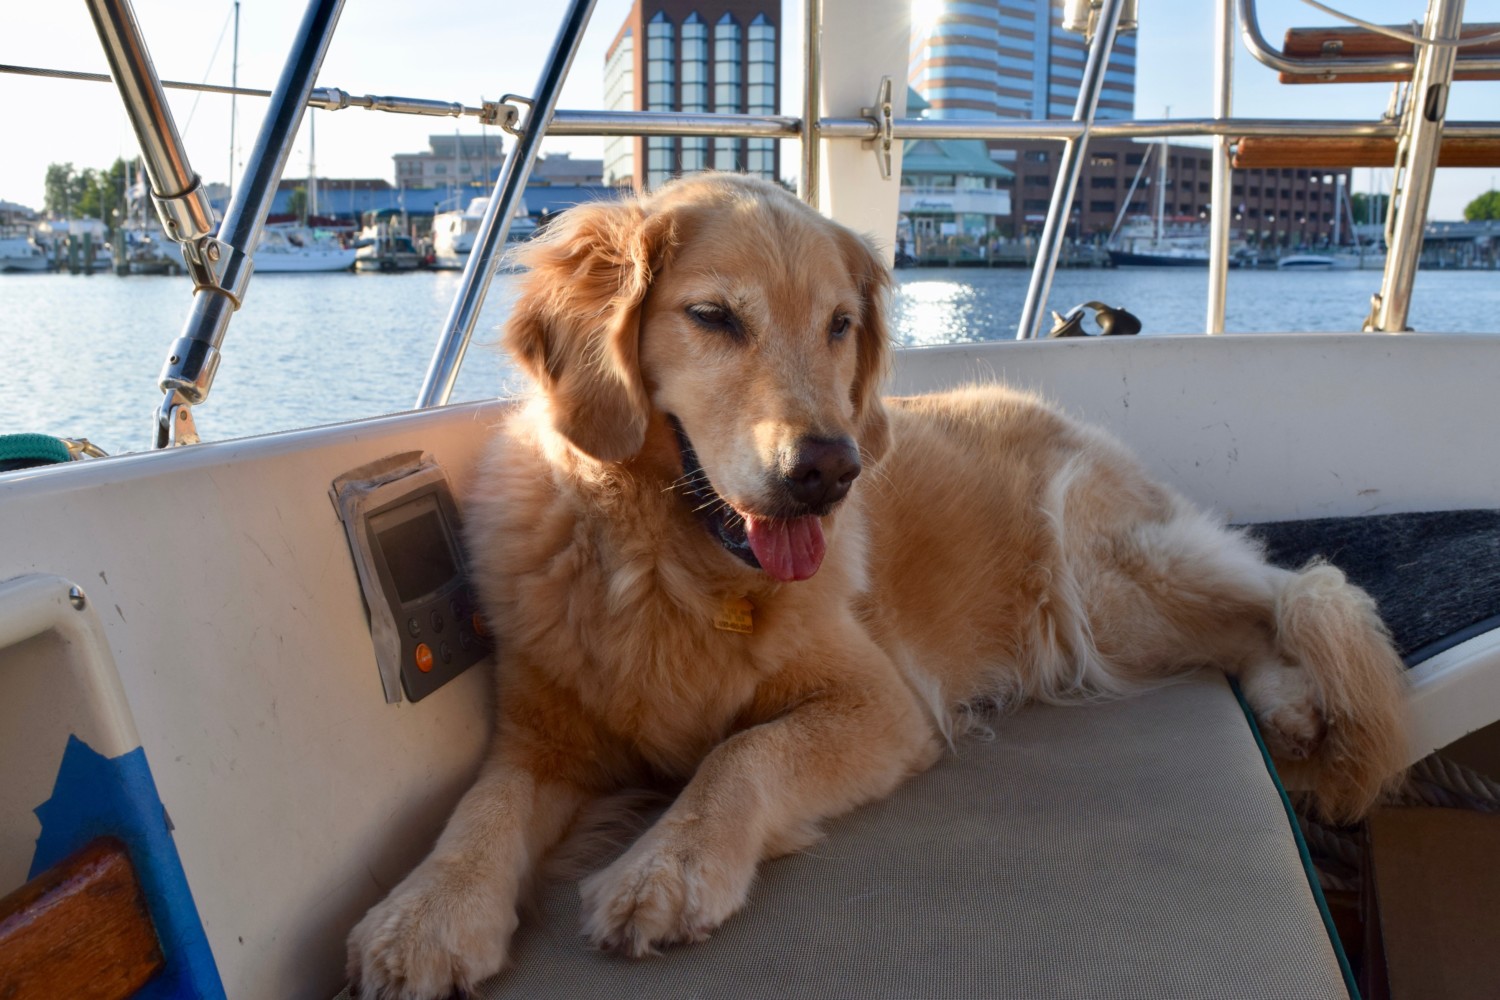 Honey the boat dog relaxes at anchor in the Hampton River.